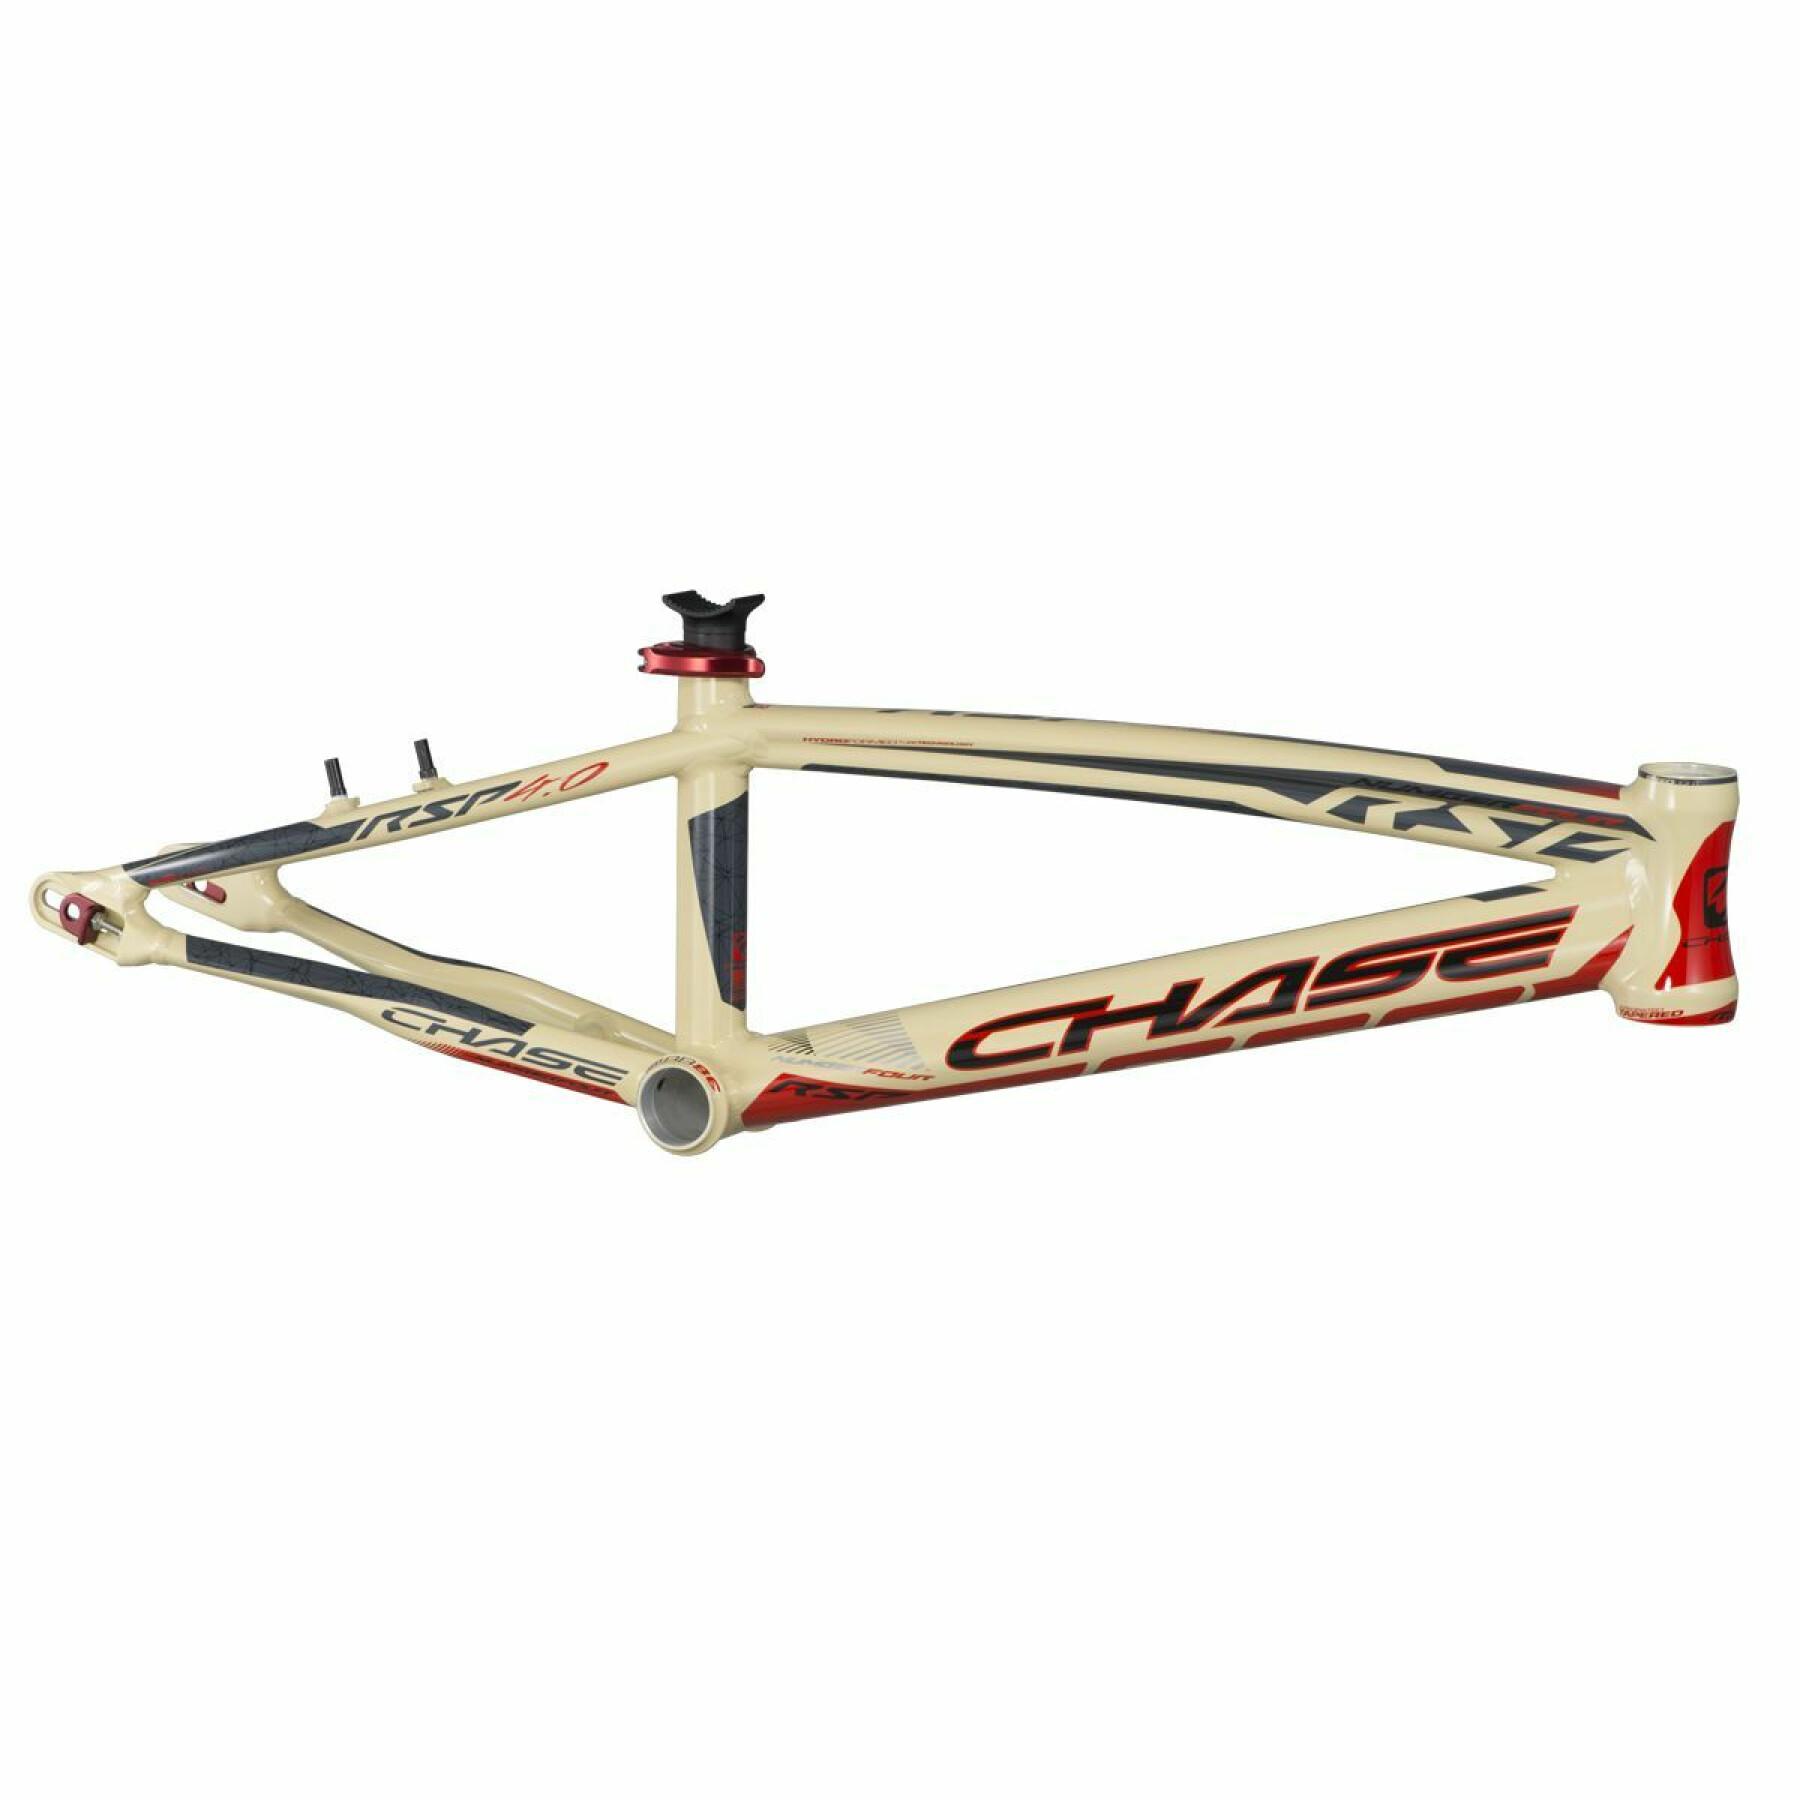 Marco Chase RSP 4.0 Pro + Cruiser